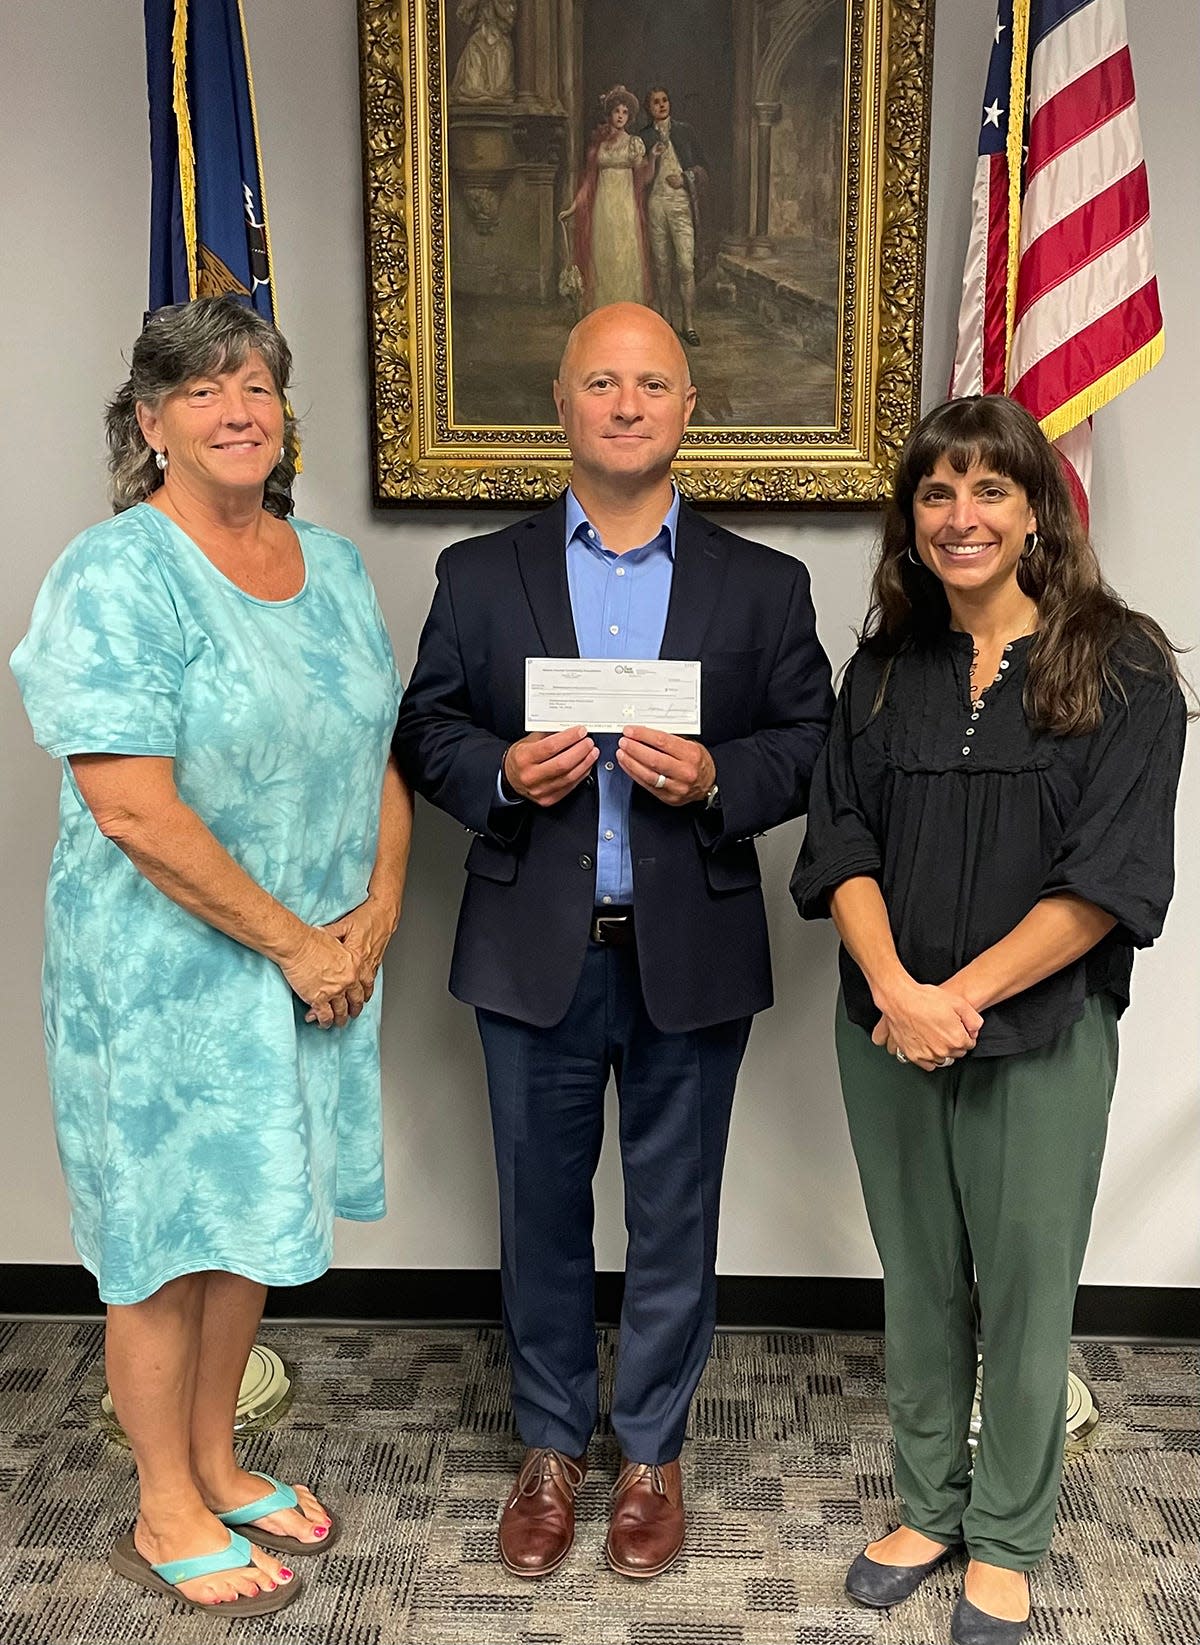 The Wayne Area Sports Hall of Fame awarded a $500 grant to Wallenpaupack Area's Athletic Council, which was organized and run by the late Ann Marie Simons, Dr. Cara Jean Dougherty and Jennifer Kiesendahl.